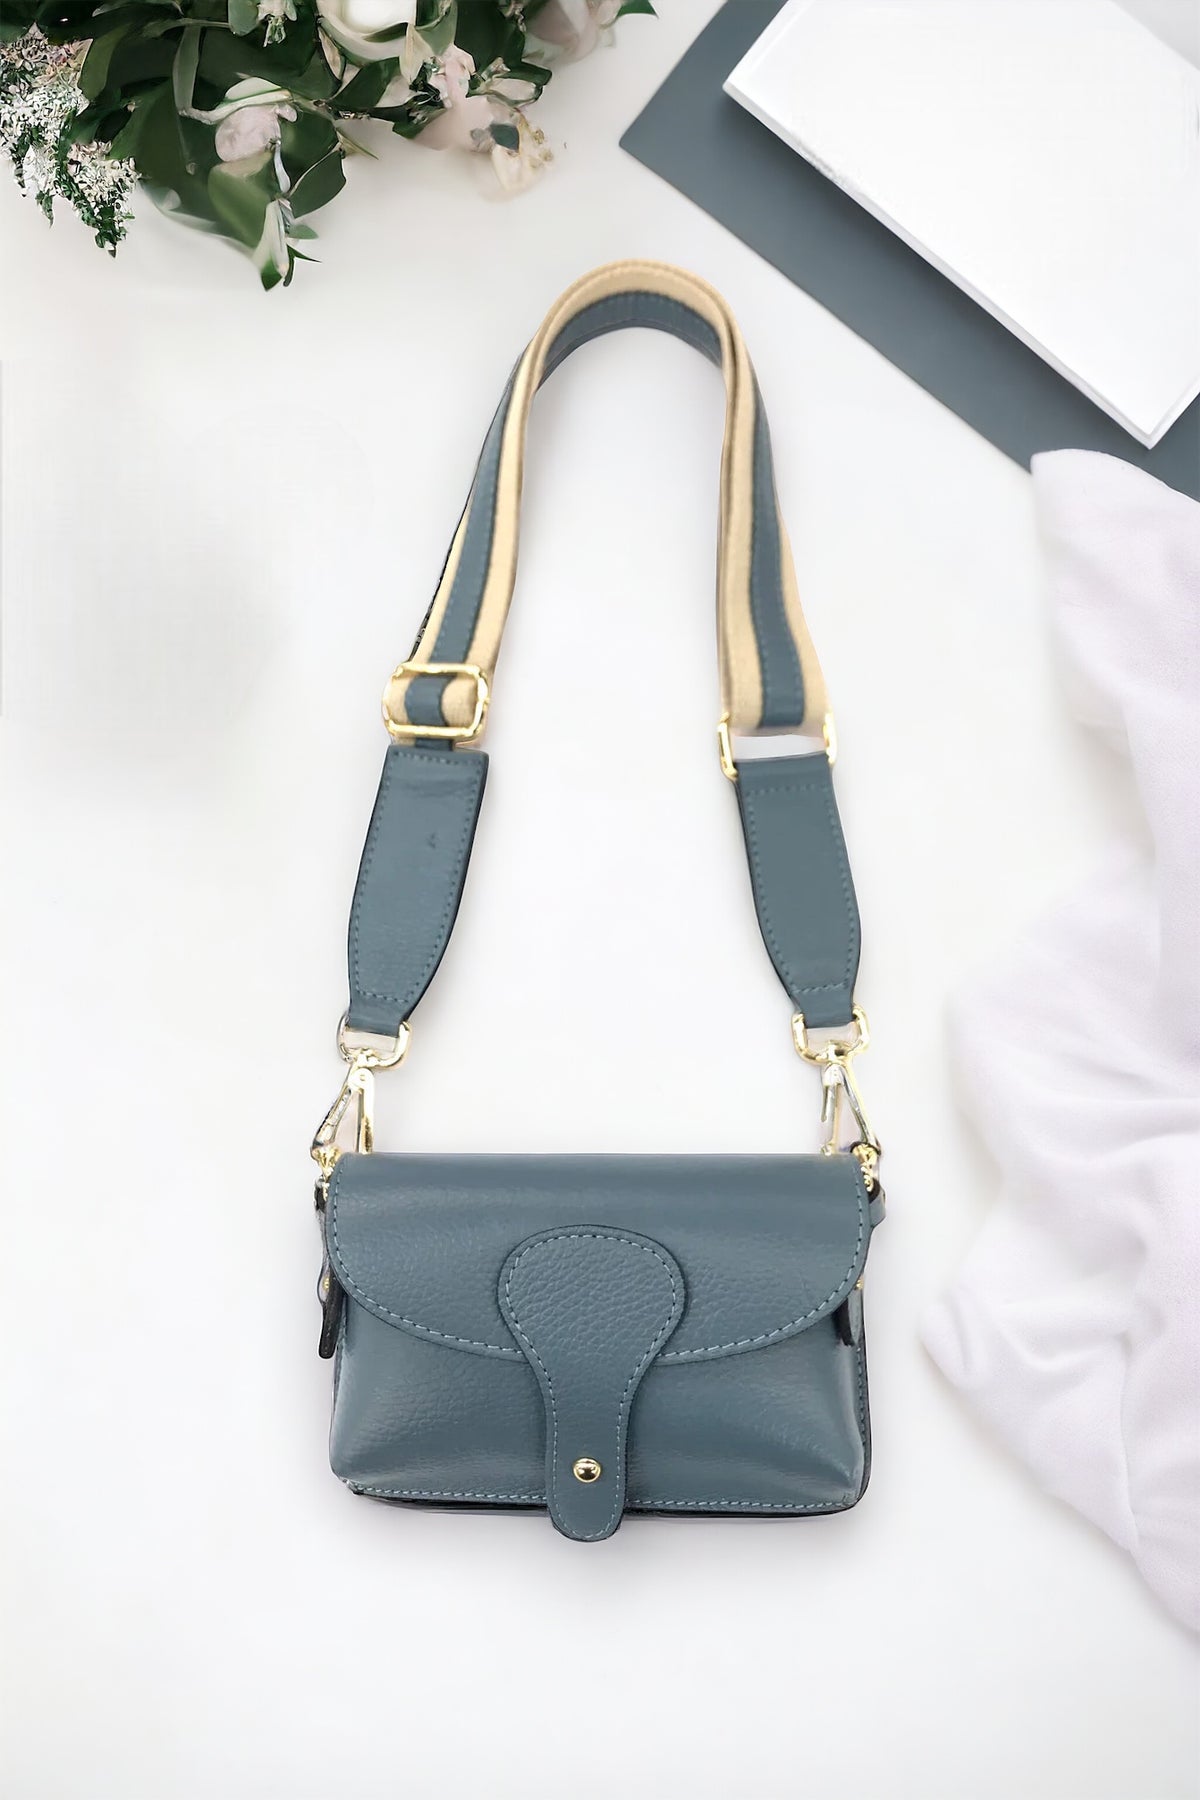 Mini Leather Messenger Crossbody Bag- Blue-240 Bags-BC Handbags-Coastal Bloom Boutique, find the trendiest versions of the popular styles and looks Located in Indialantic, FL